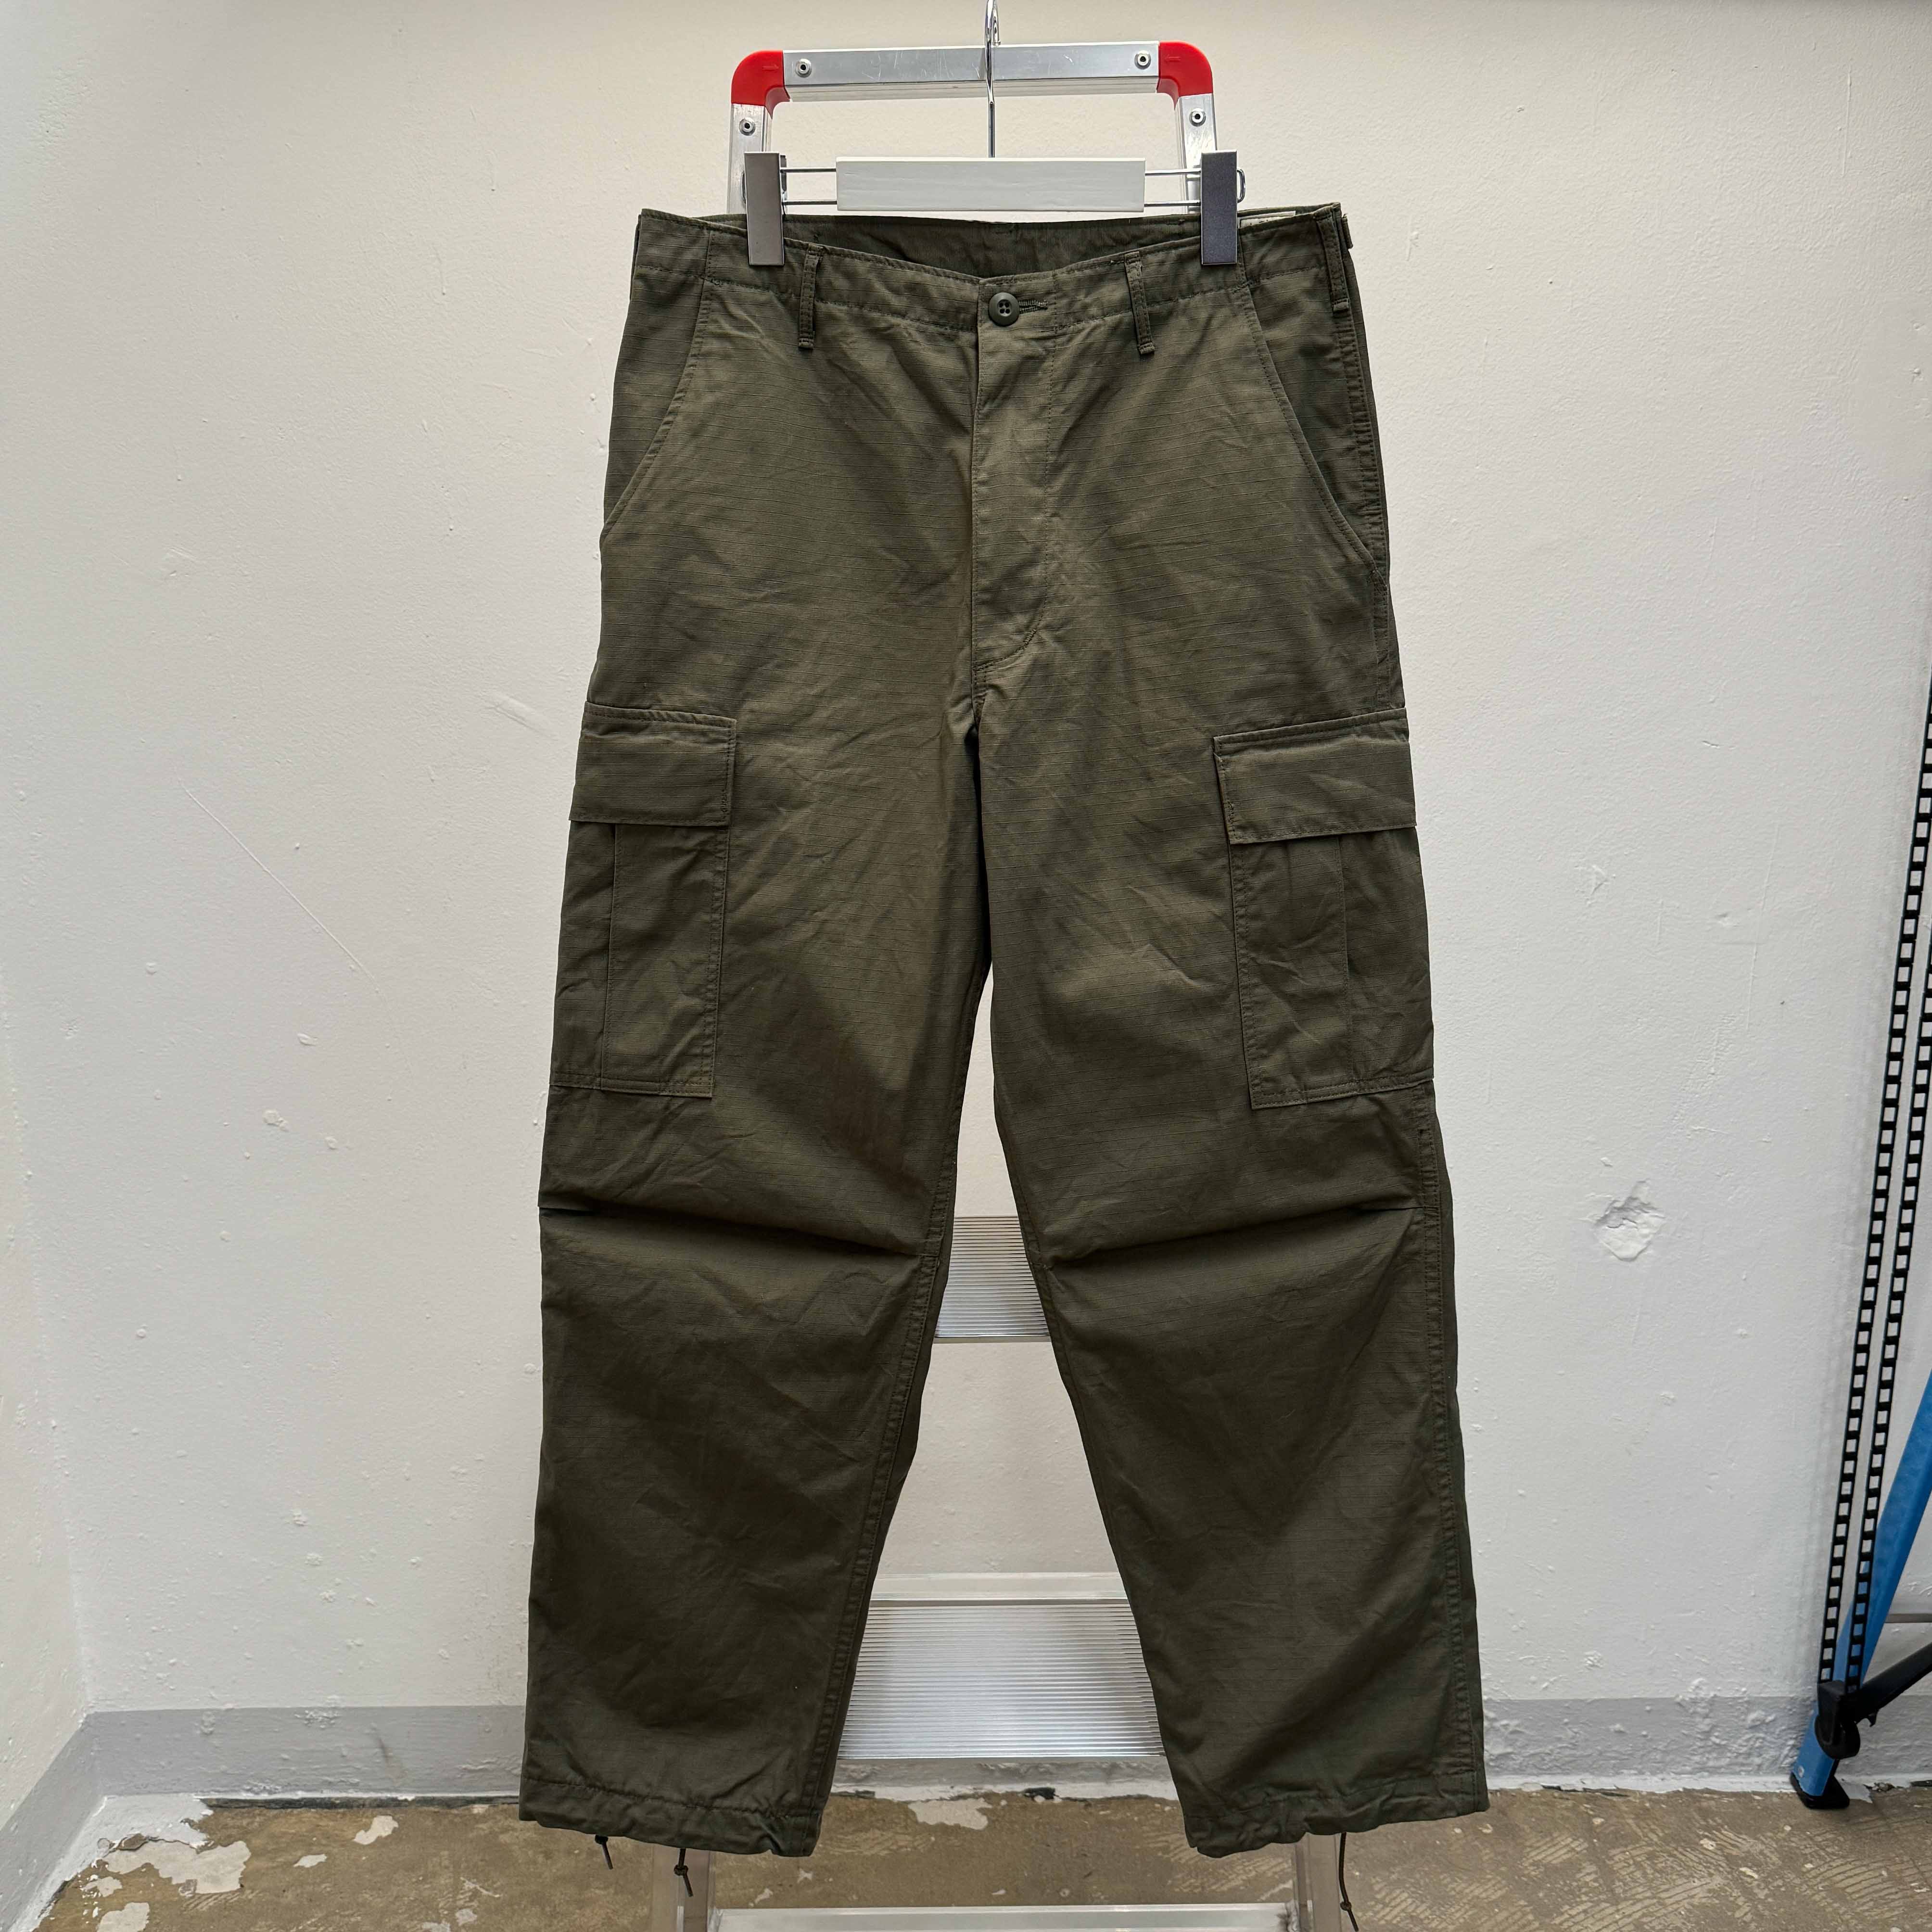 ORSLOW 6 POCKET CARGO PANTS - ARMY GREEN